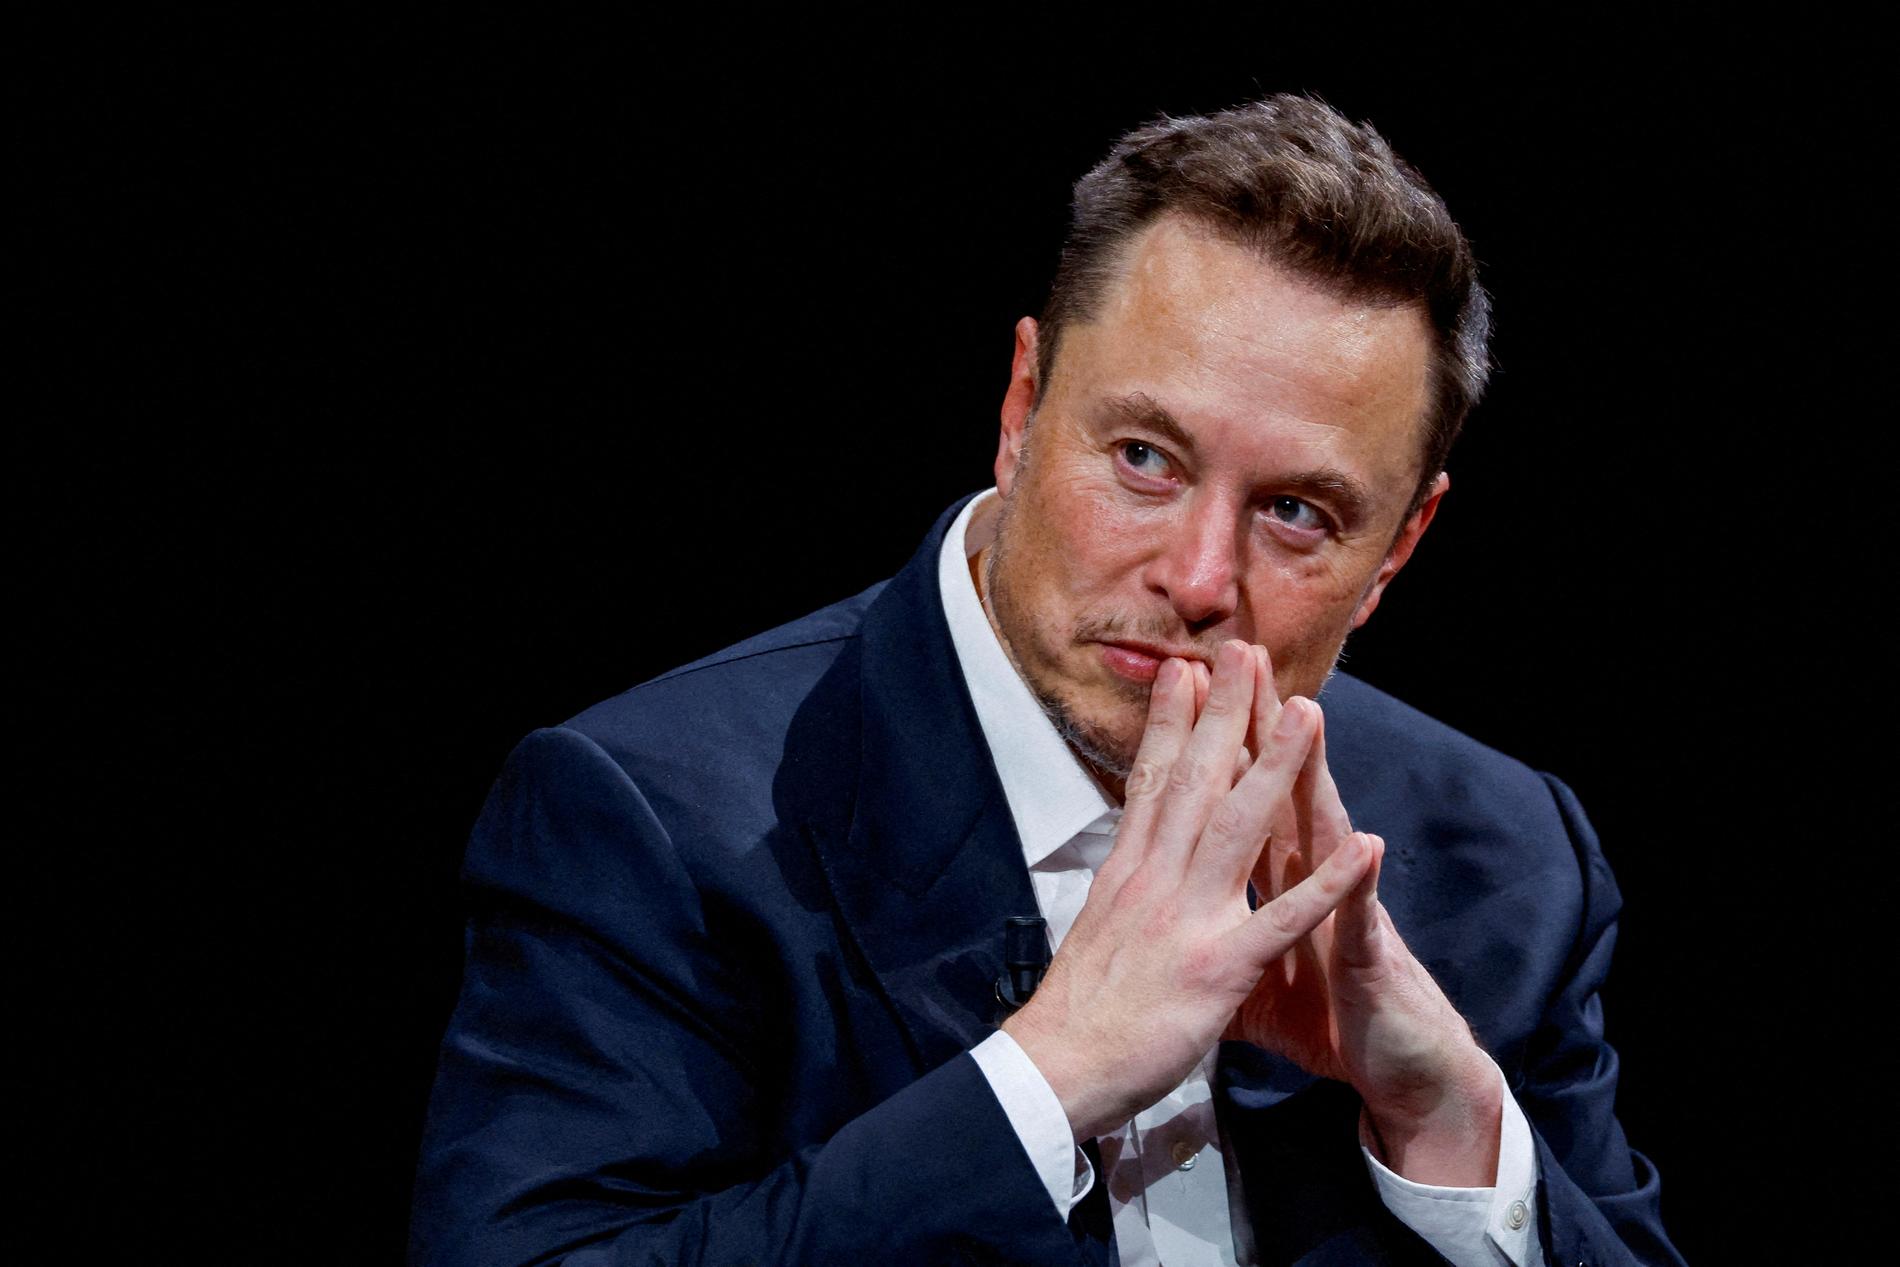 Elon Musk is under investigation by the US Financial Regulatory Authority